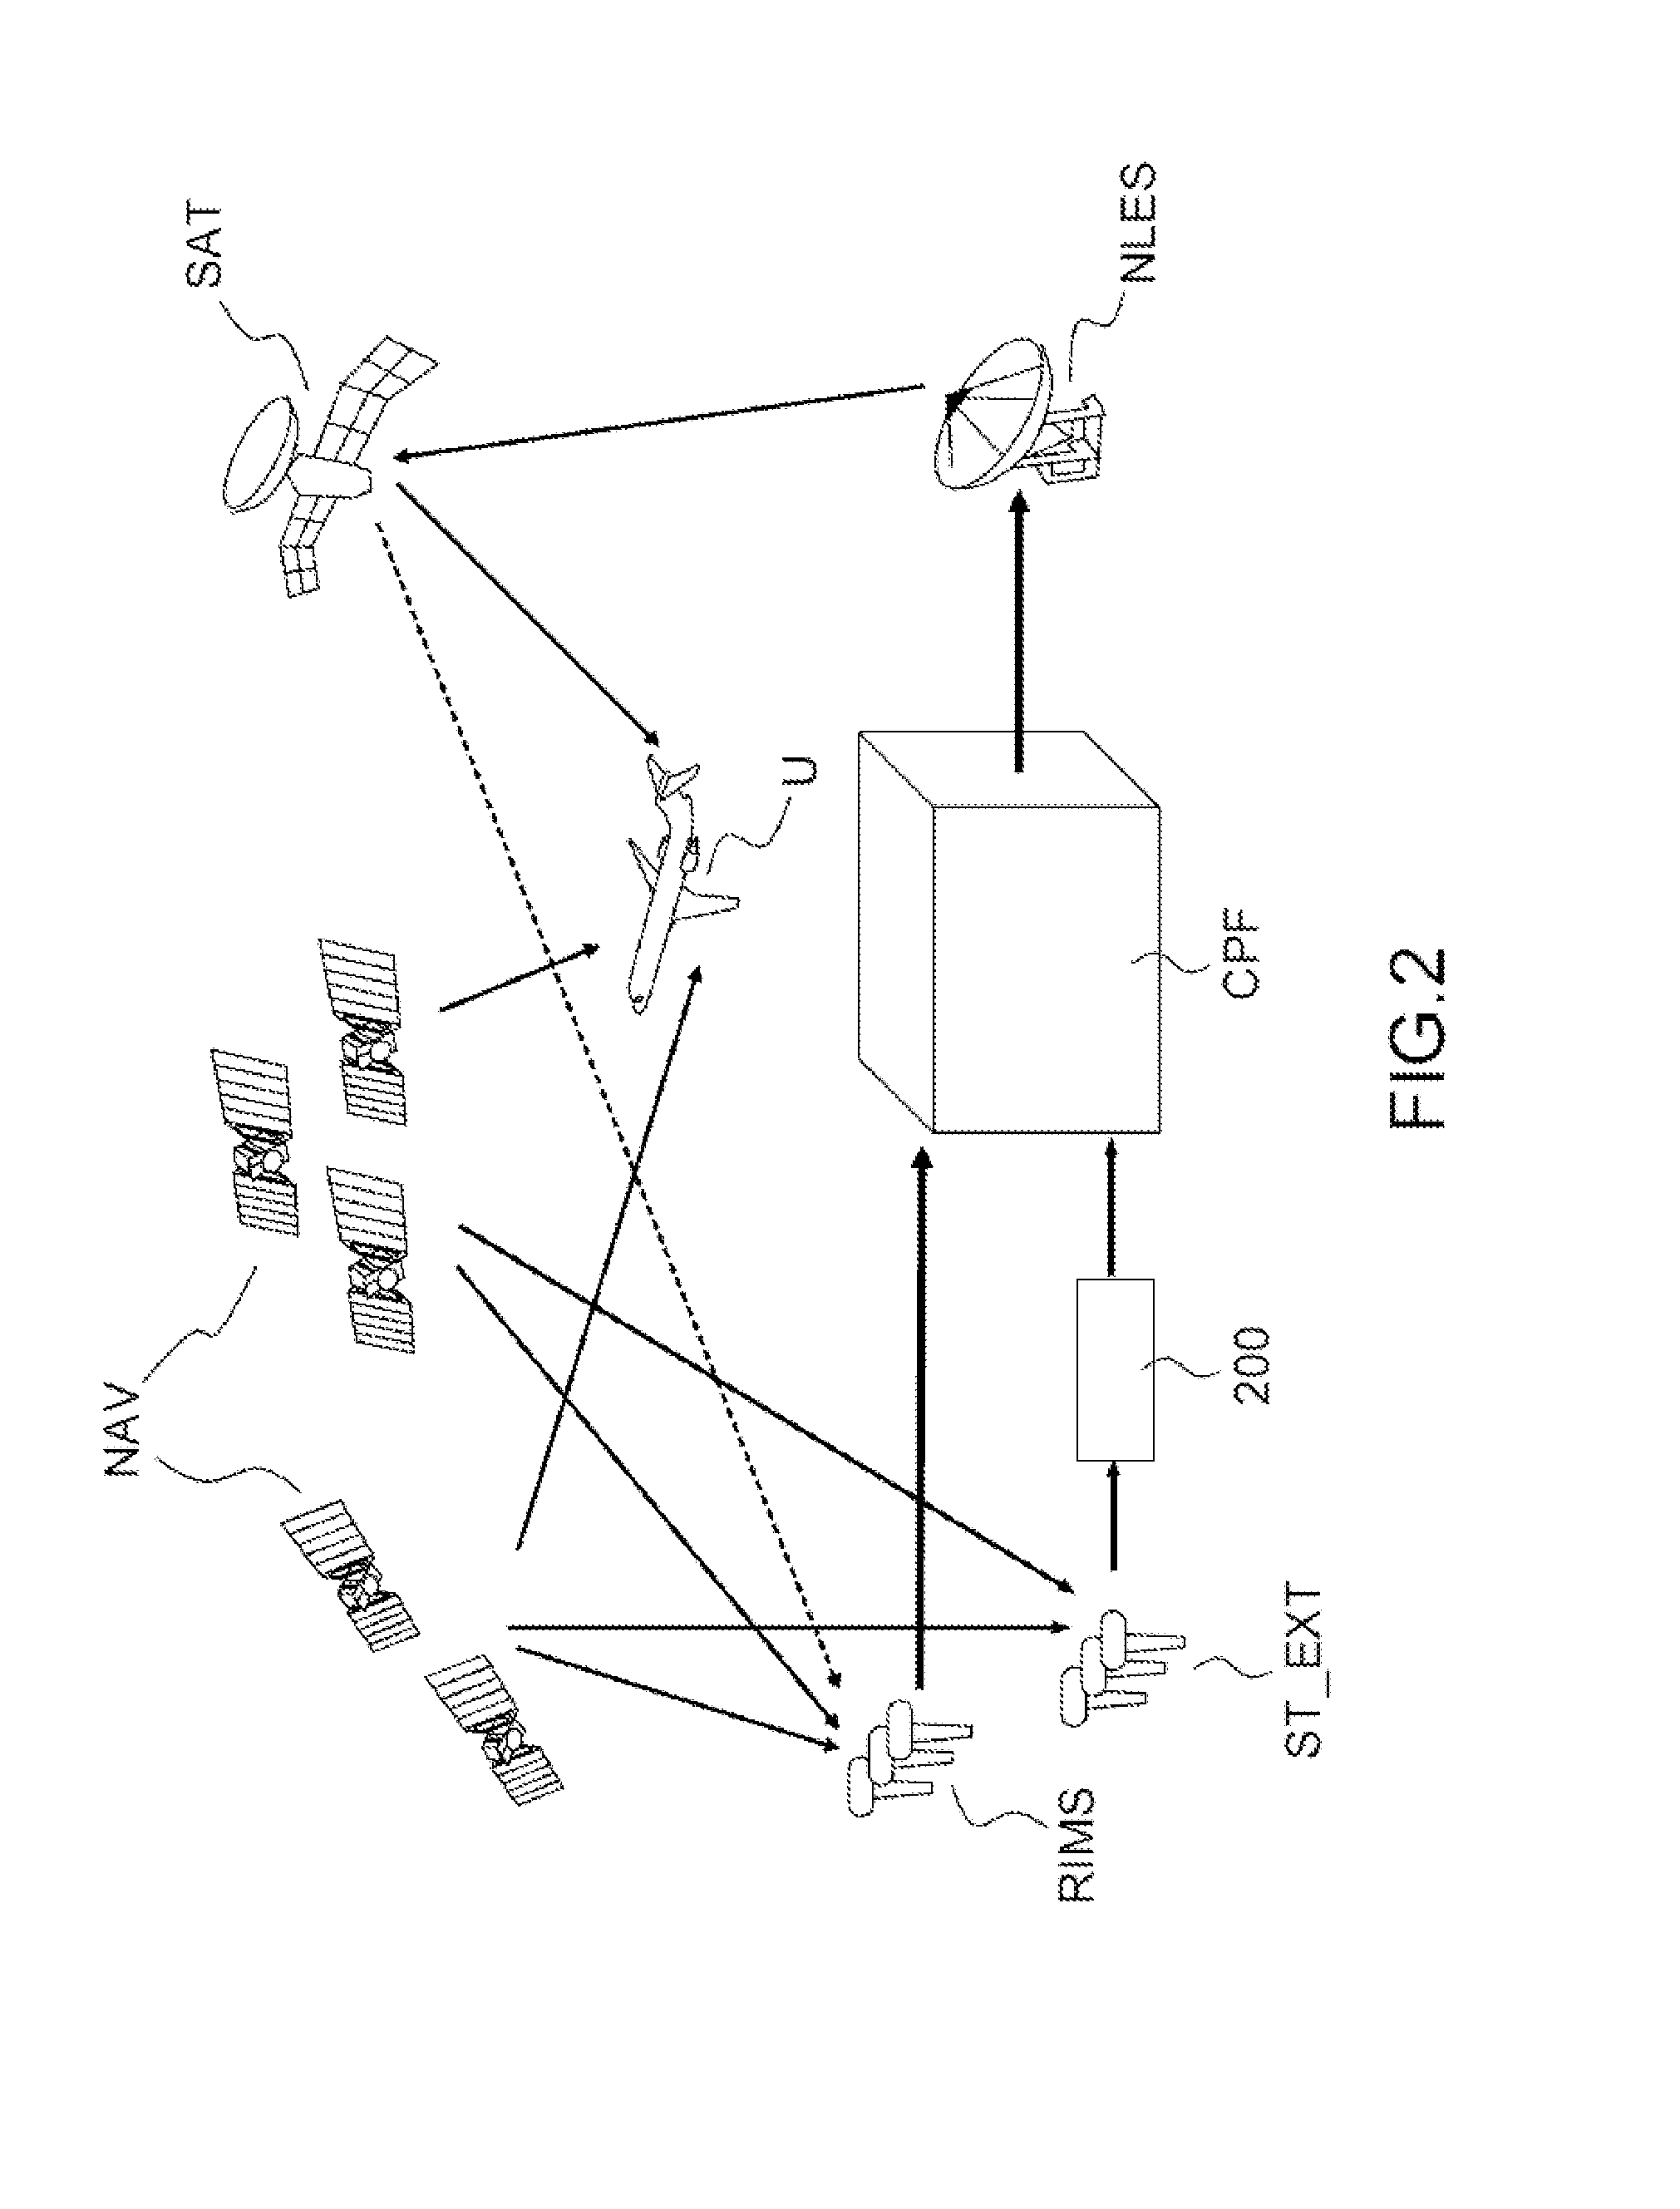 Method of monitoring the integrity of radio-navigation stations in a satellite based augmentation system